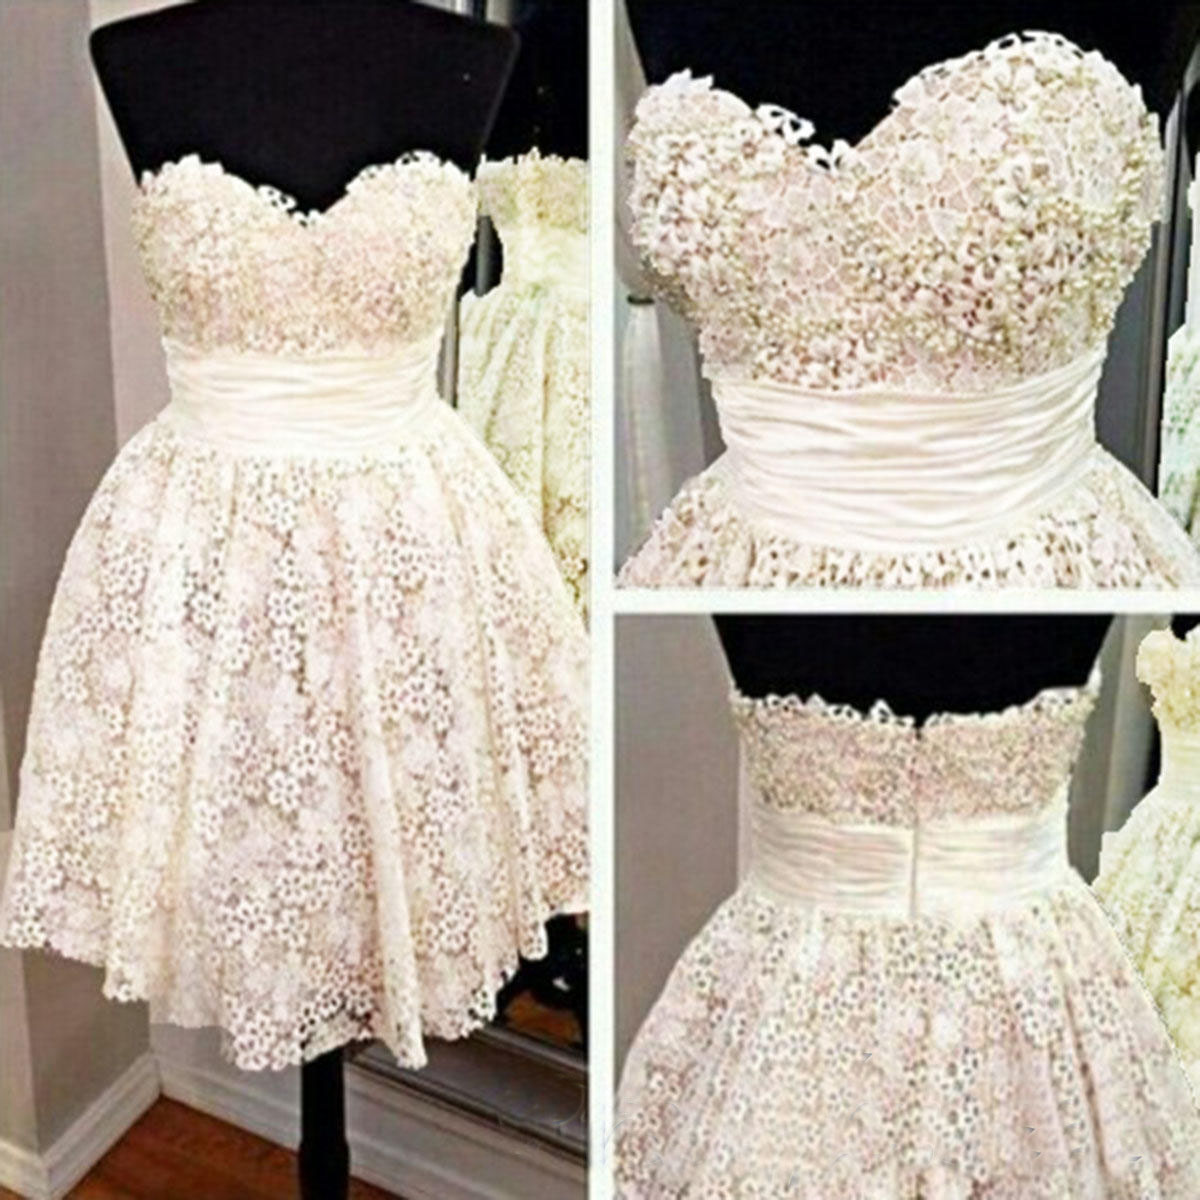 Homecoming Dress, Short Homecoming Dress, Lace Homecoming Prom Dress, Mini Prom Dress, Party Dresses For Girls, 14113